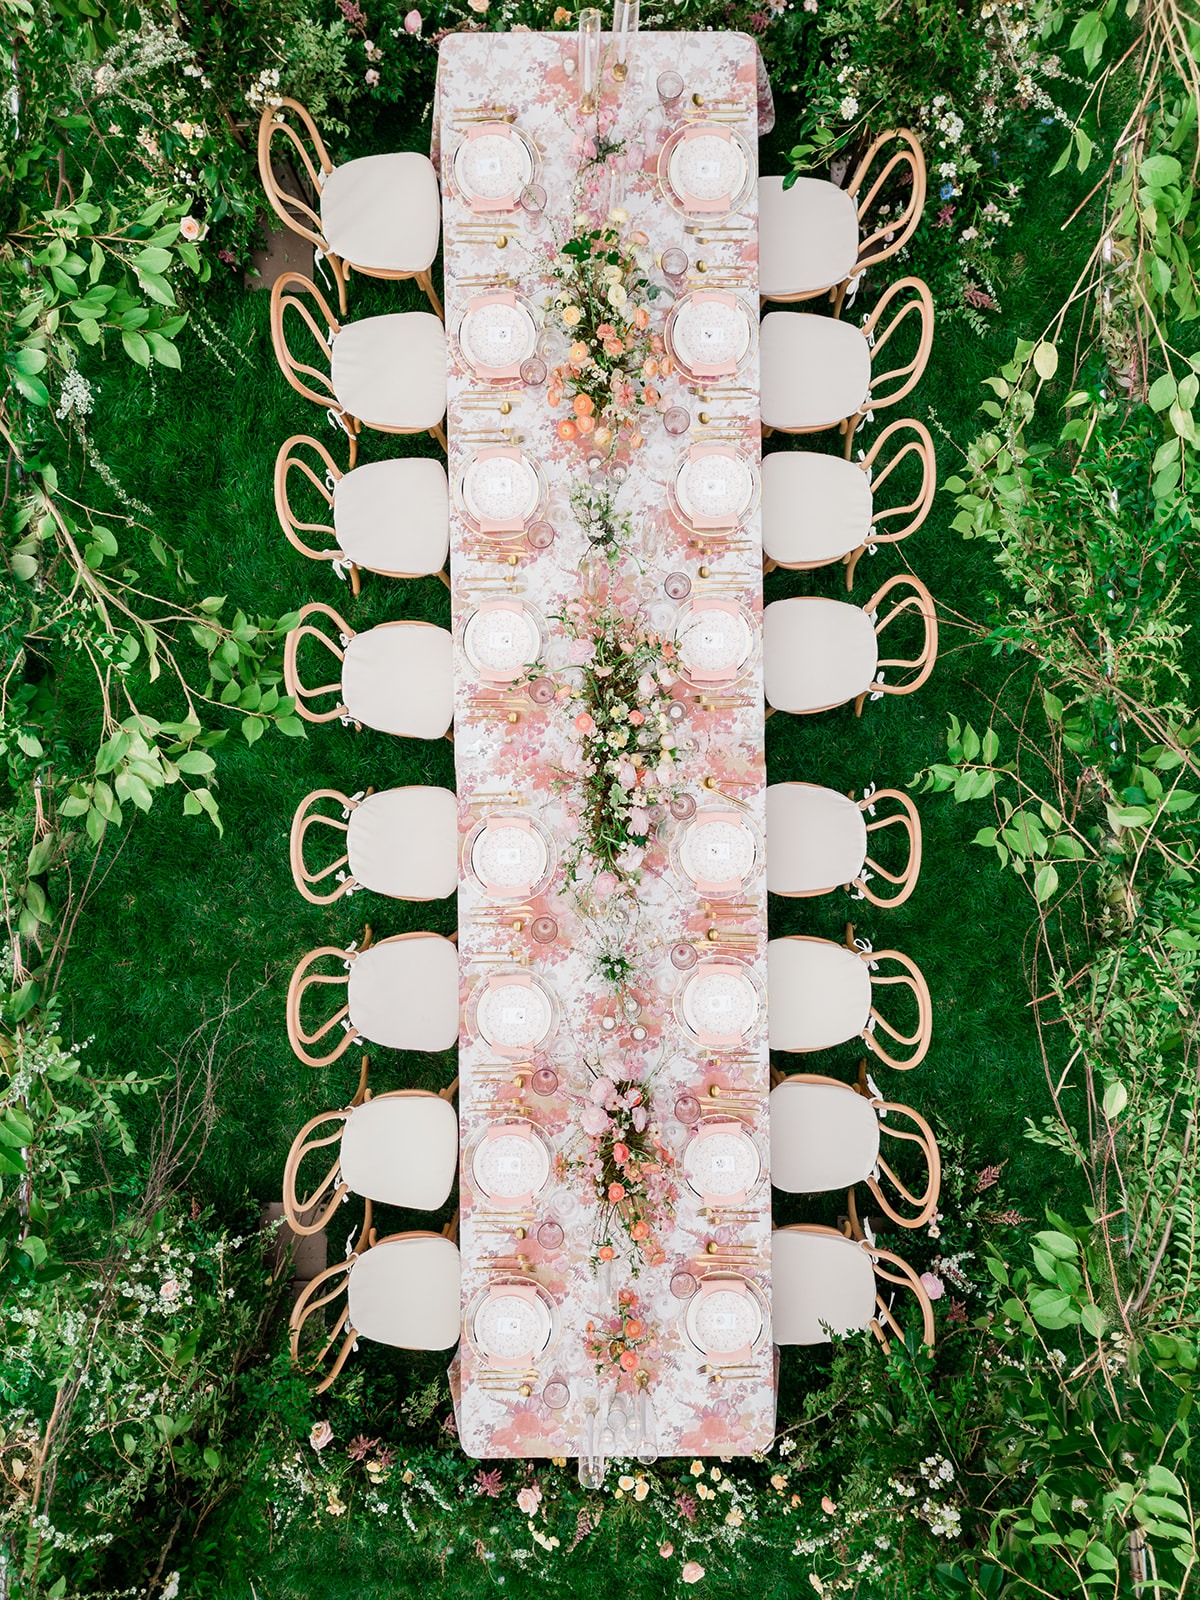 Pink pastel floral garden party wedding reception table inspo